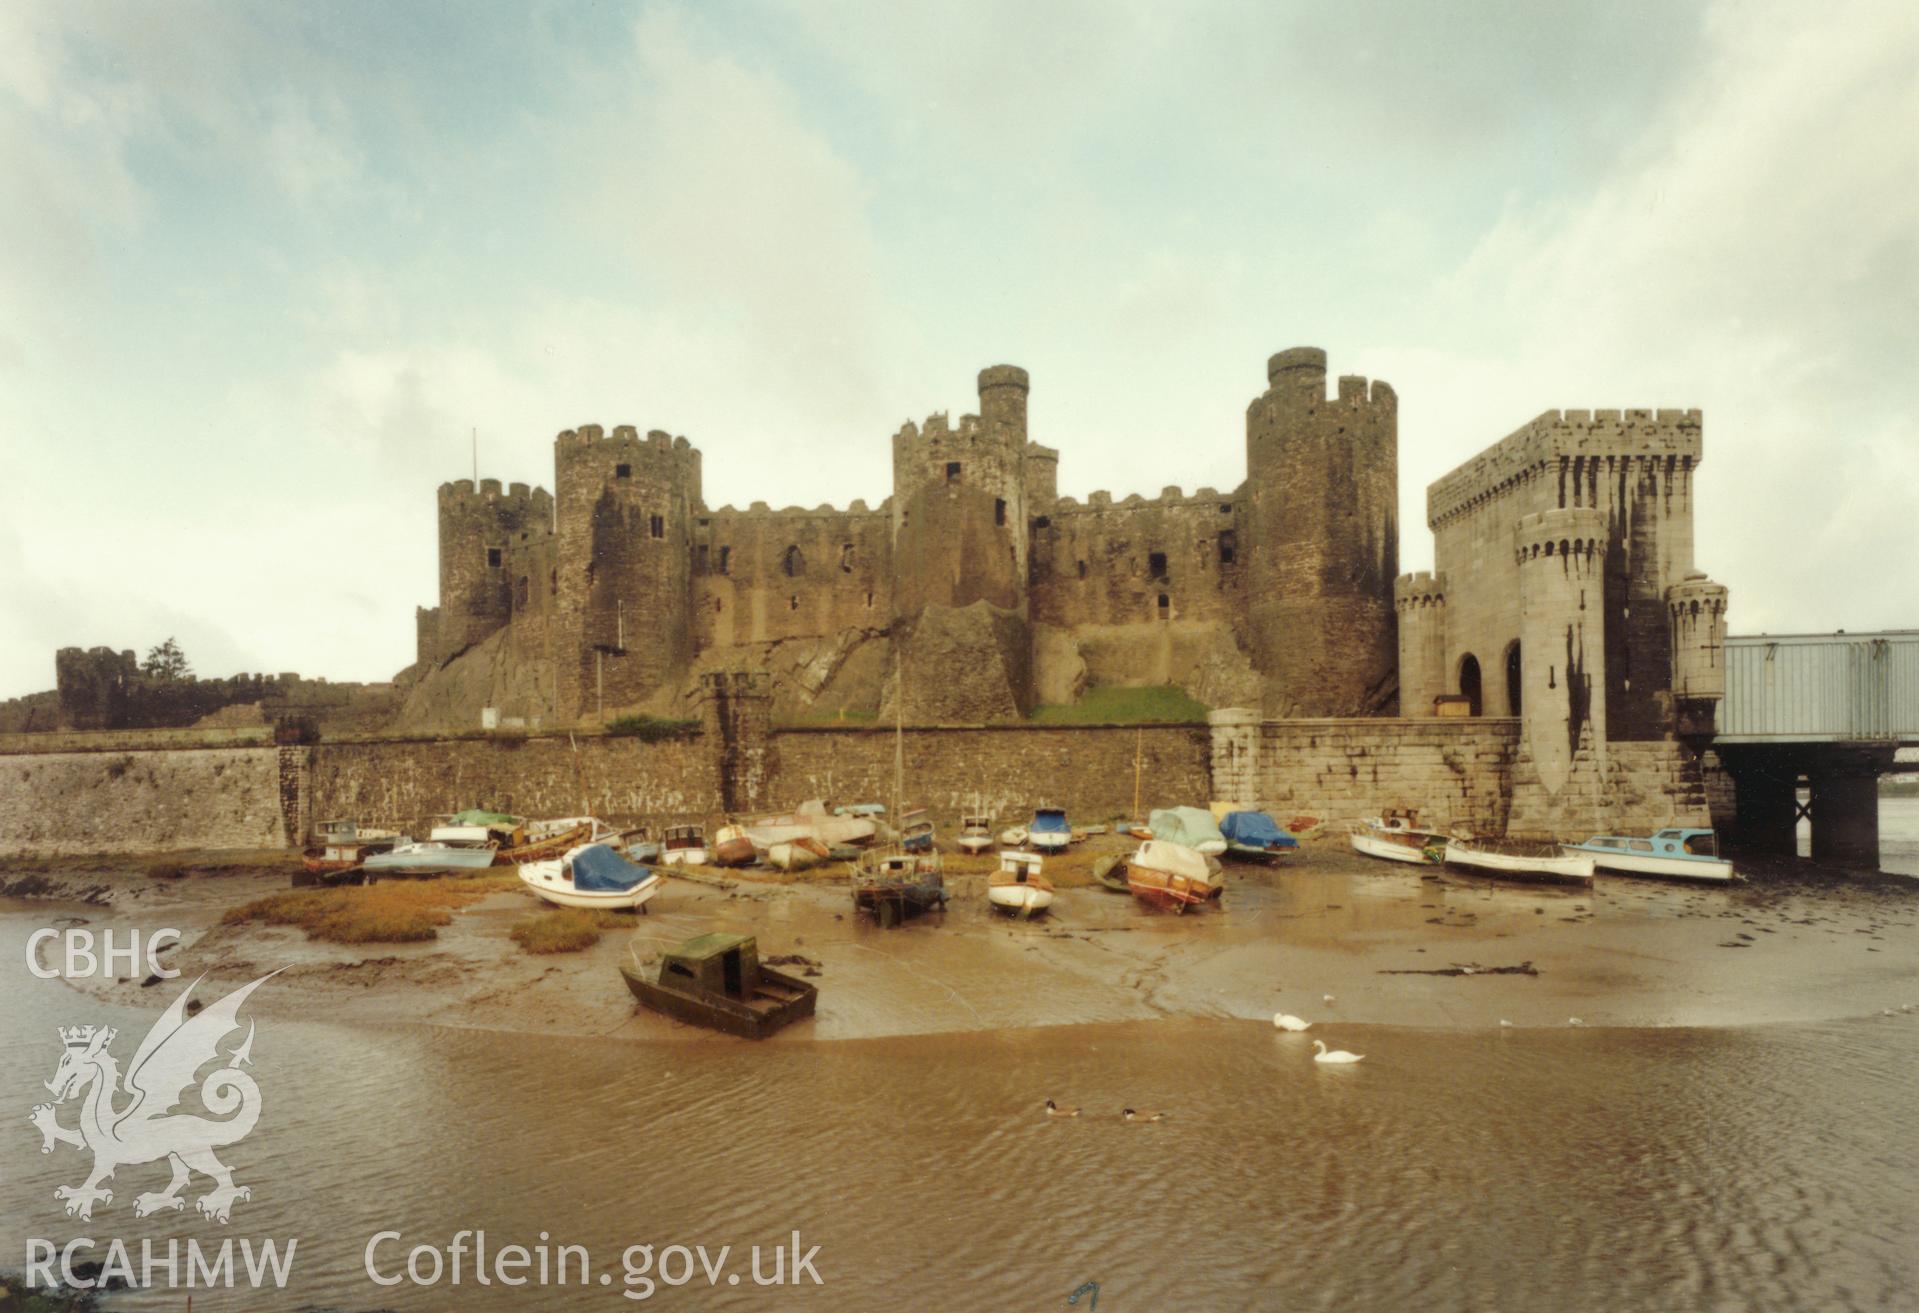 1 of a set of 27 colour prints: print showing view of Conwy castle with boats, collated by the former Central Office of Information.